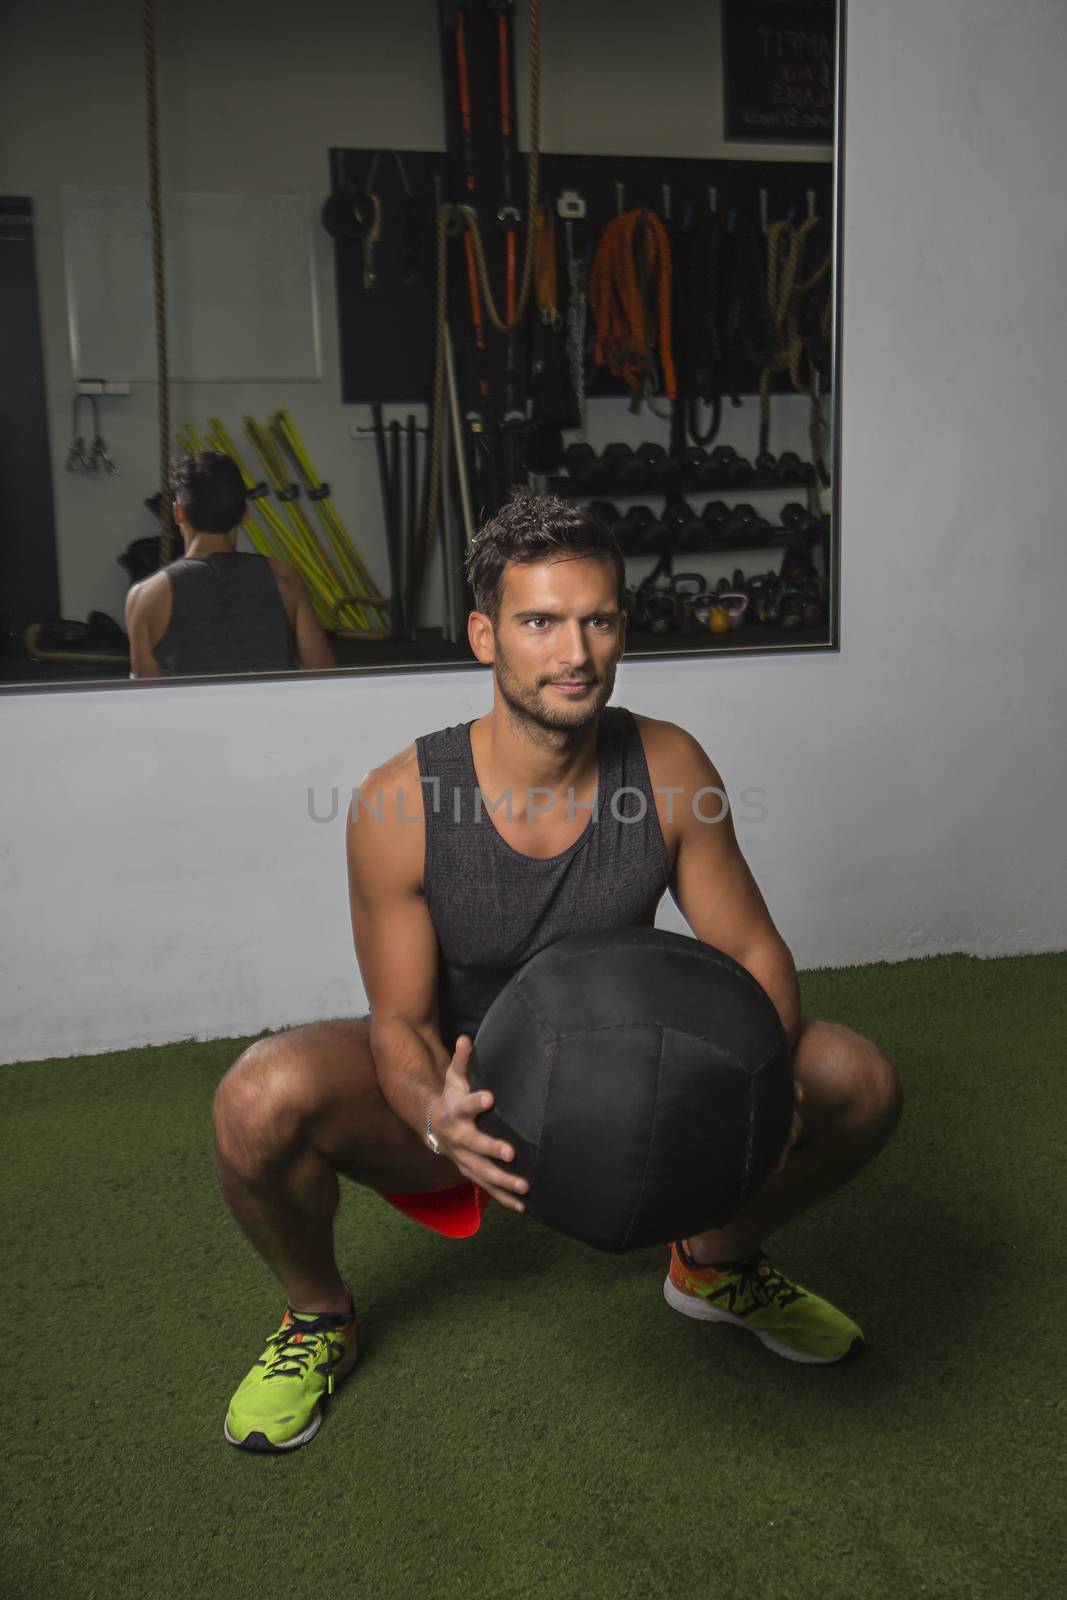 Squatting with a medicine ball by mypstudio